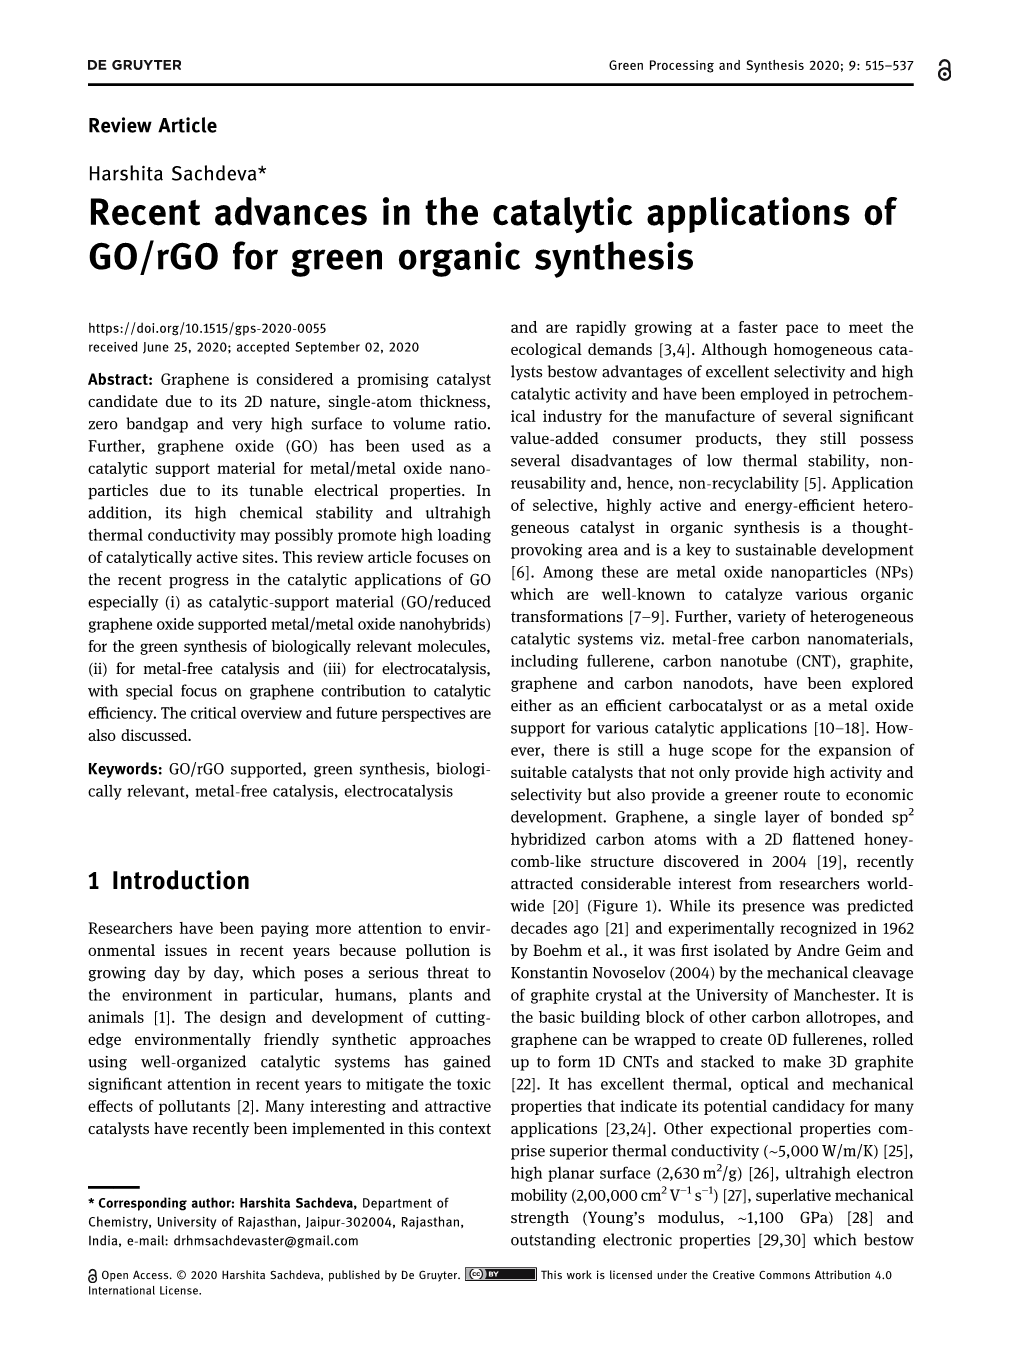 Recent Advances in the Catalytic Applications of GO/Rgo for Green Organic Synthesis